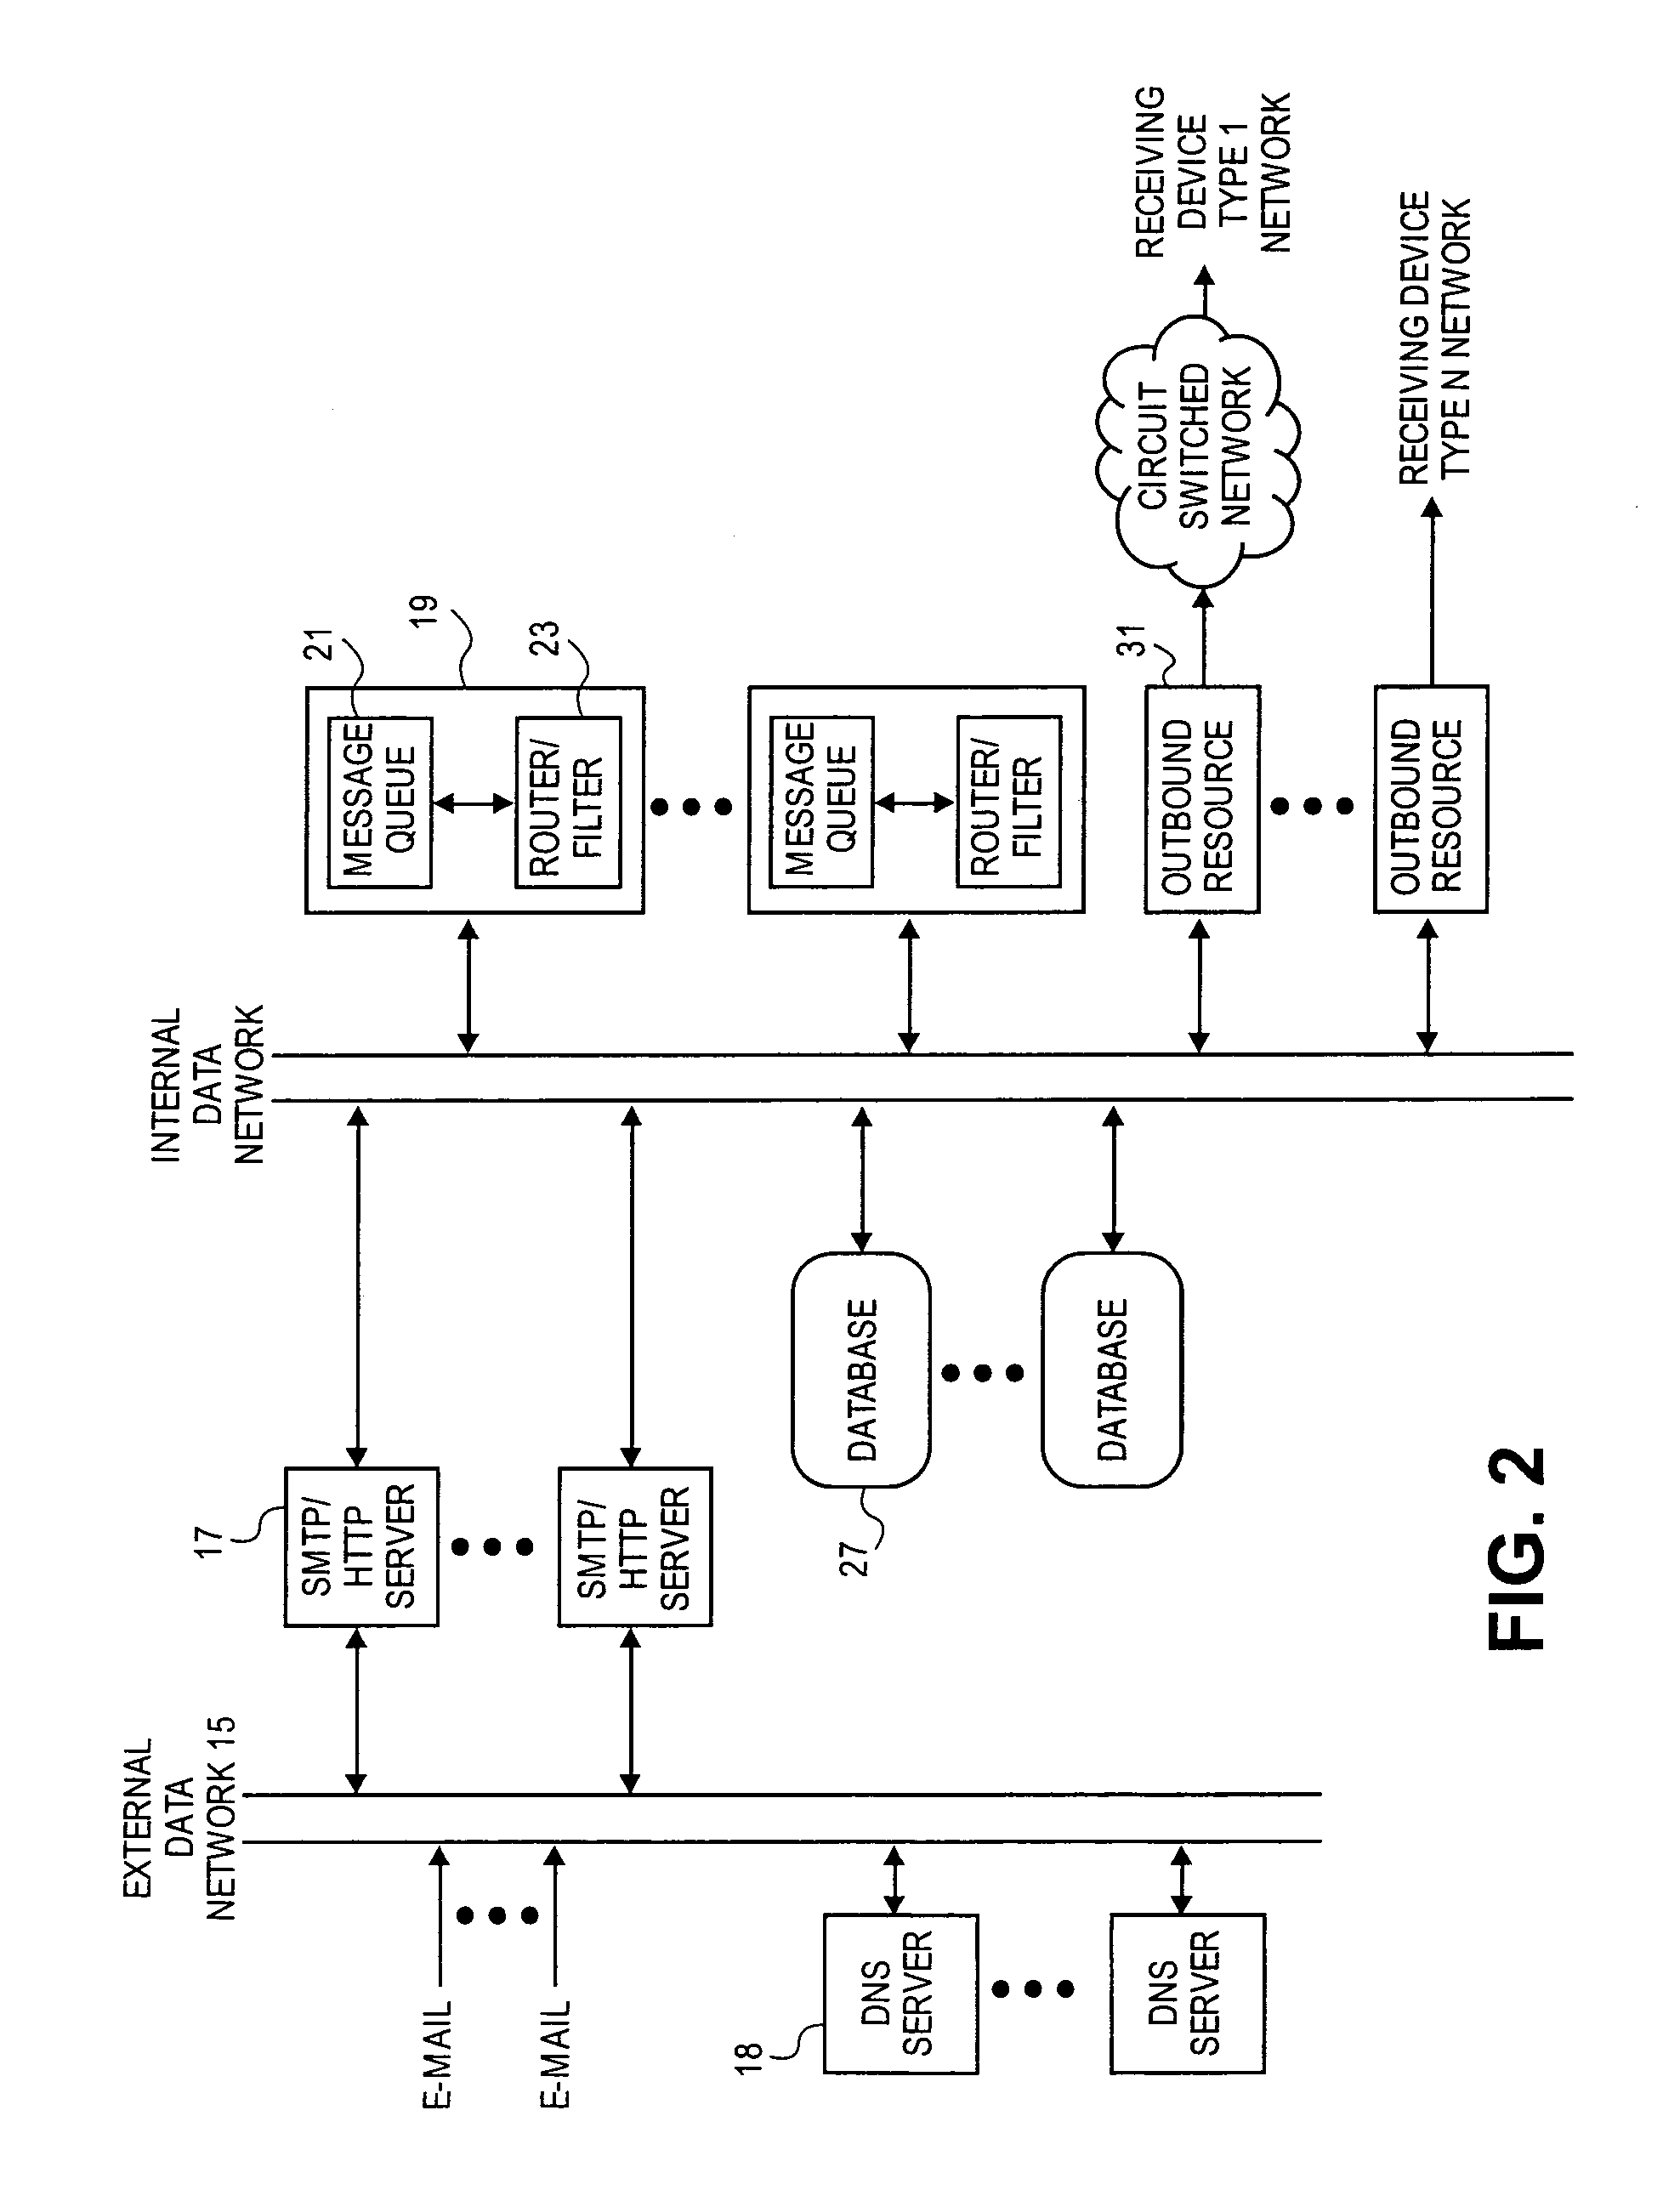 Scalable architecture for transmission of messages over a network